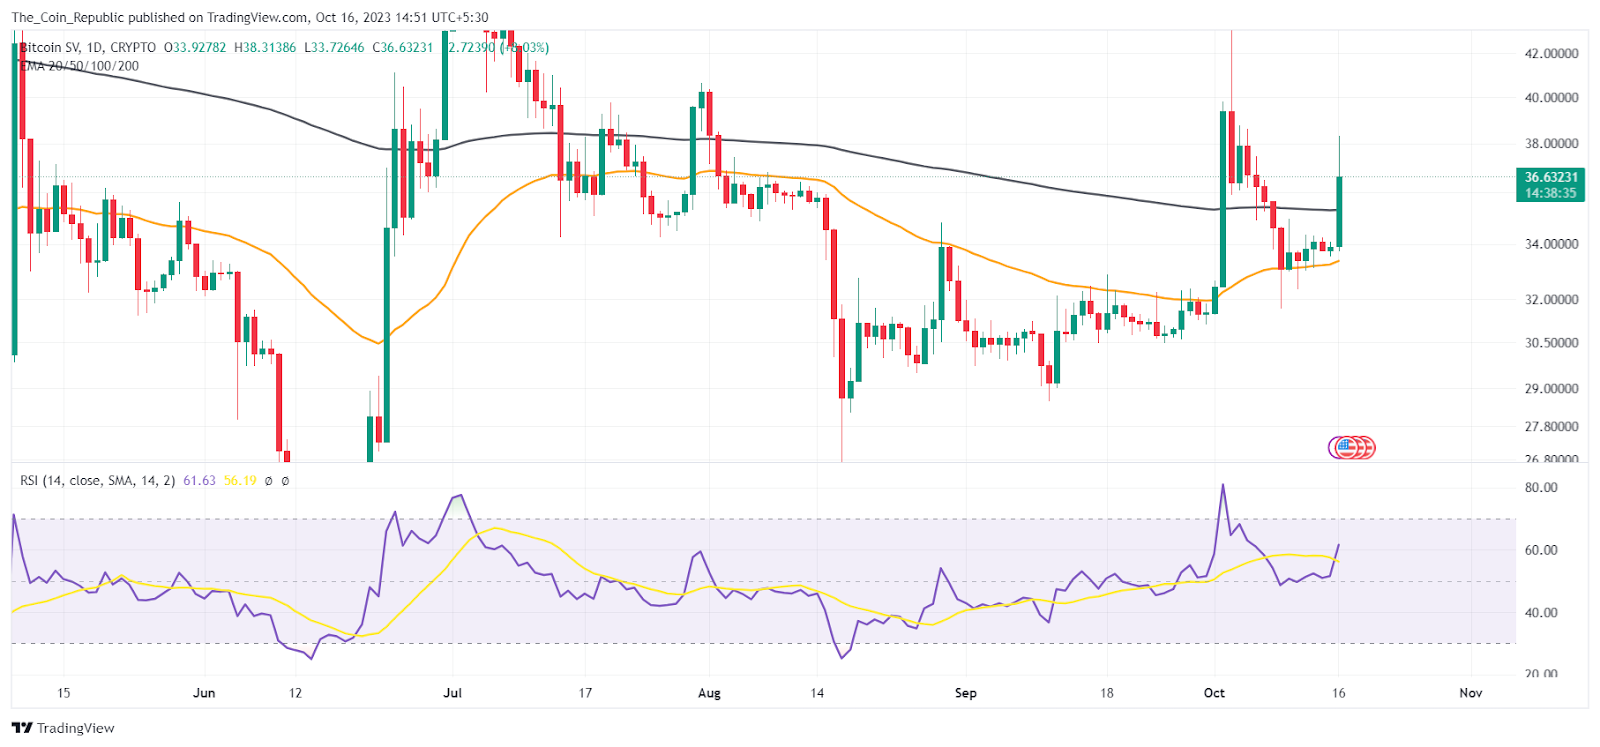 Bitcoin SV Price Rises Over 10%: Will The Bullish Rally Continue?